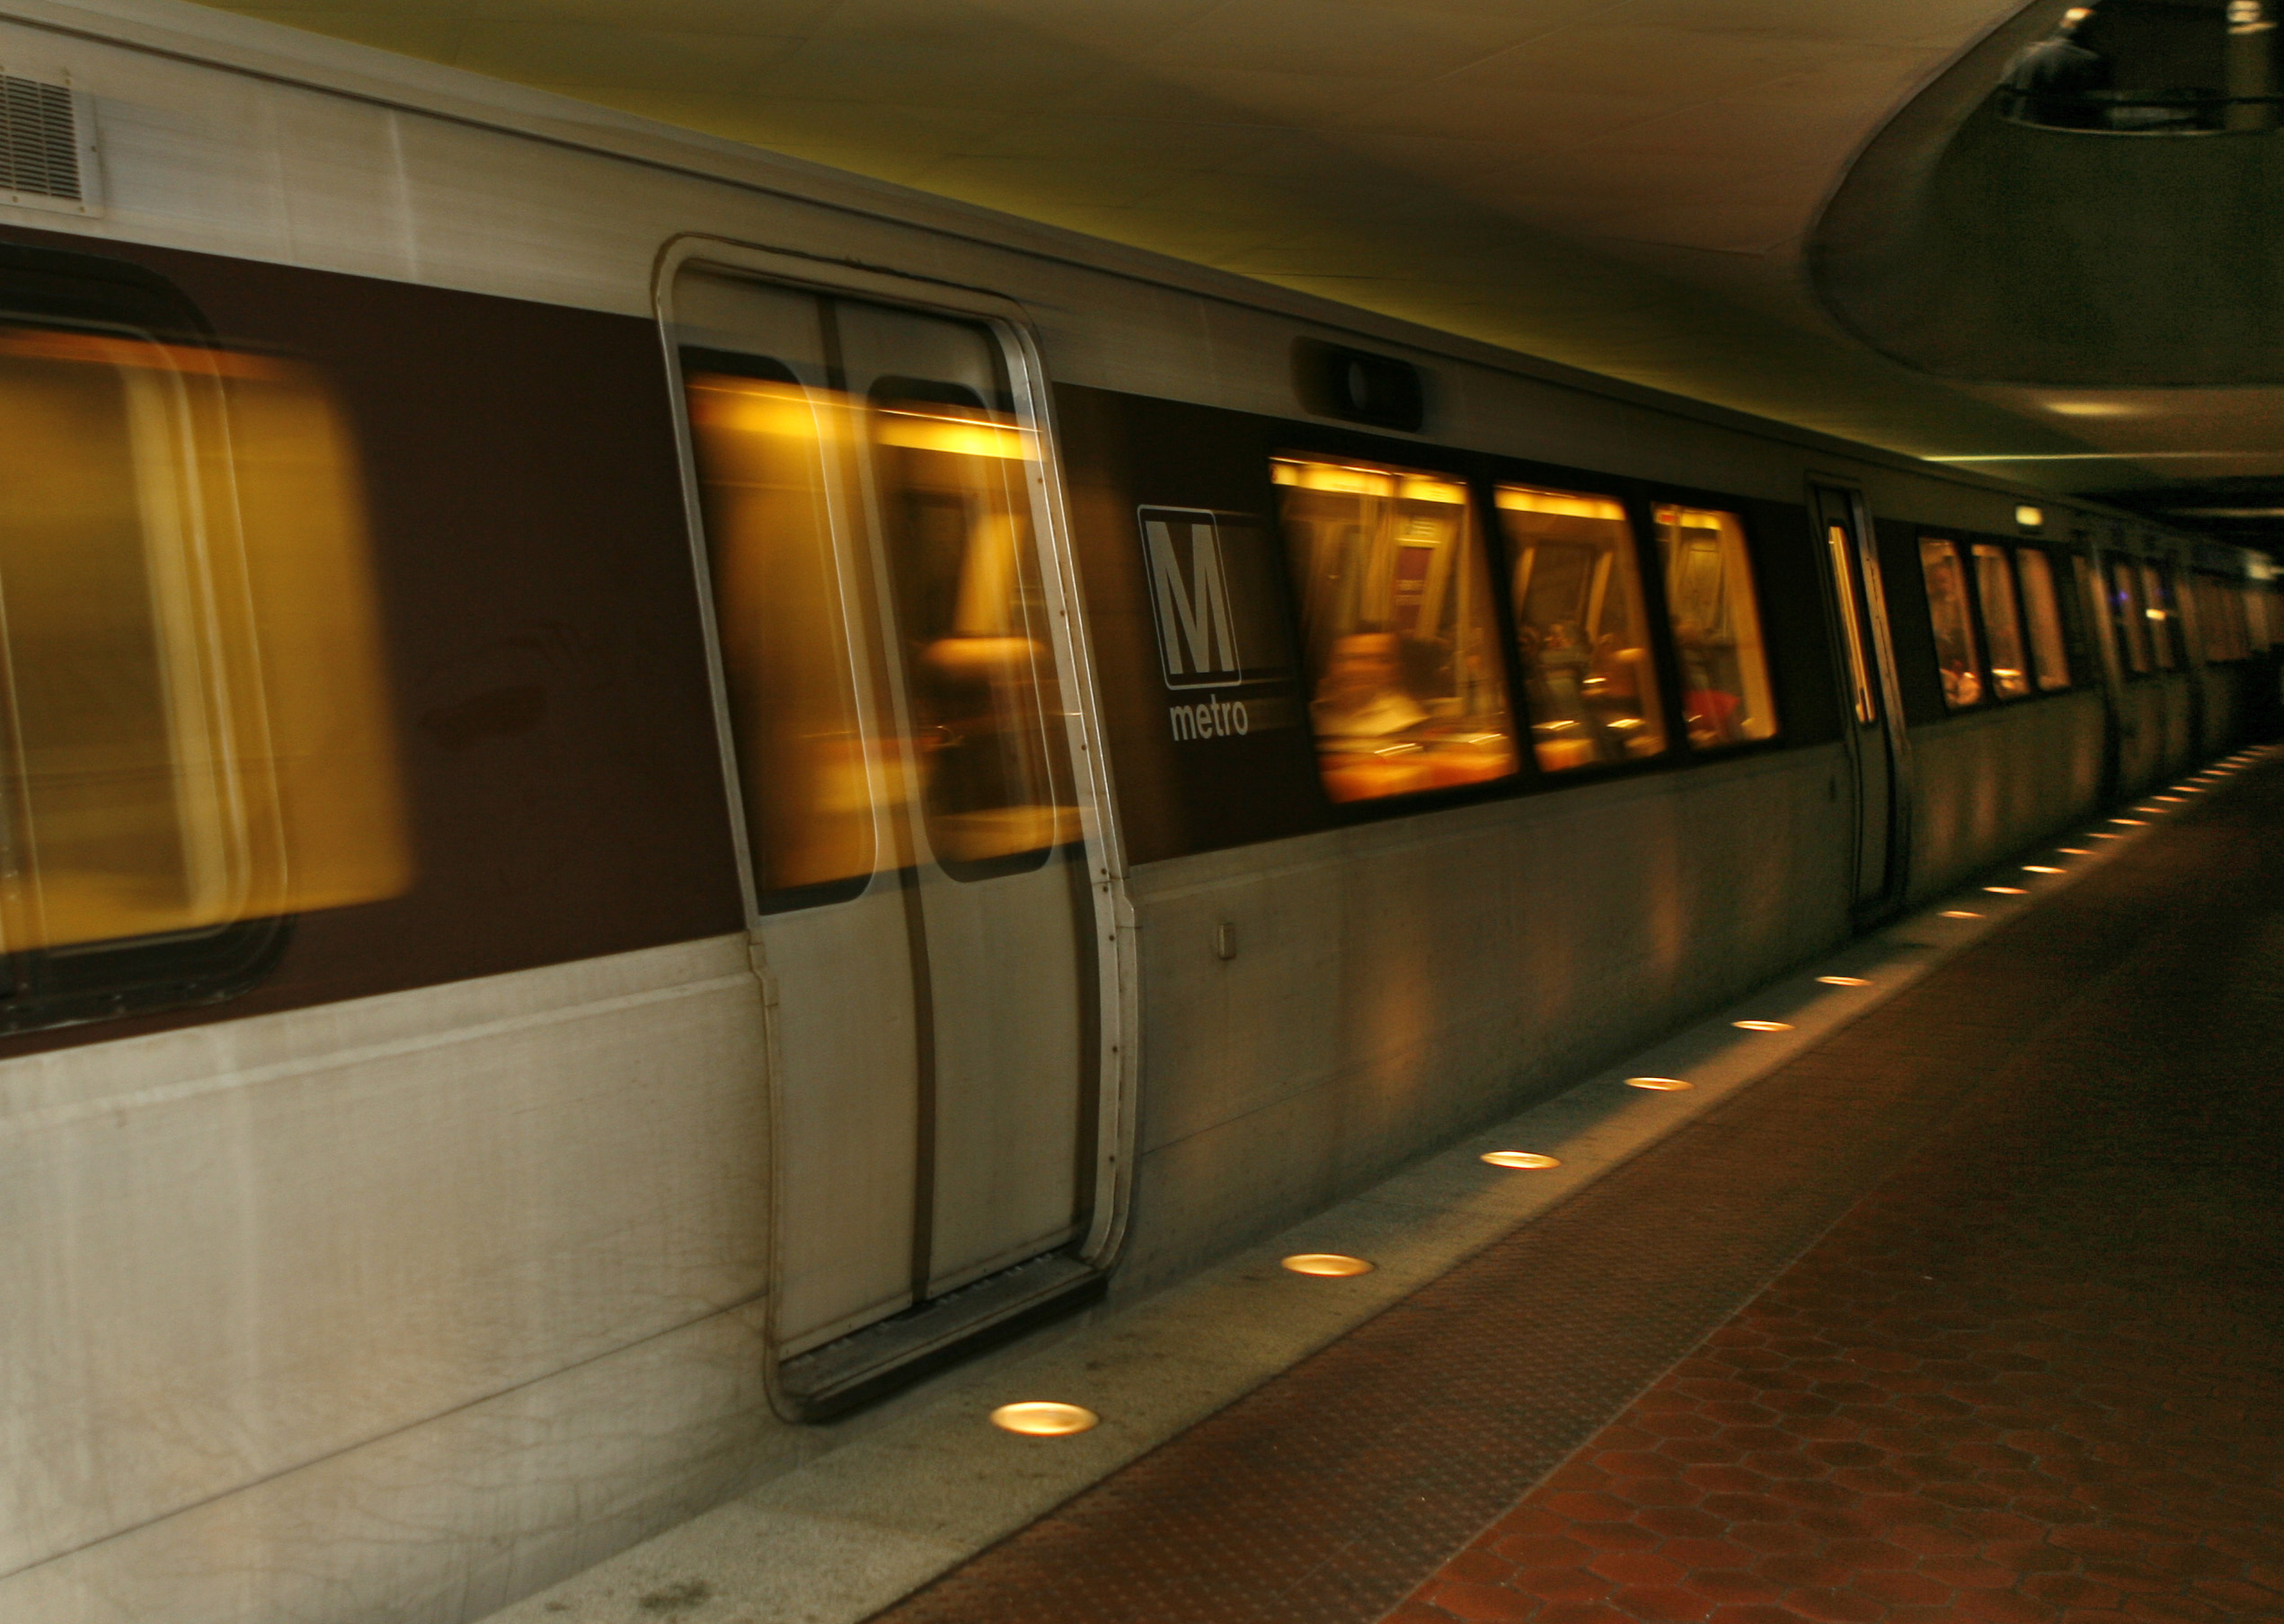 Metro drops charge for entering, exiting station in major delays